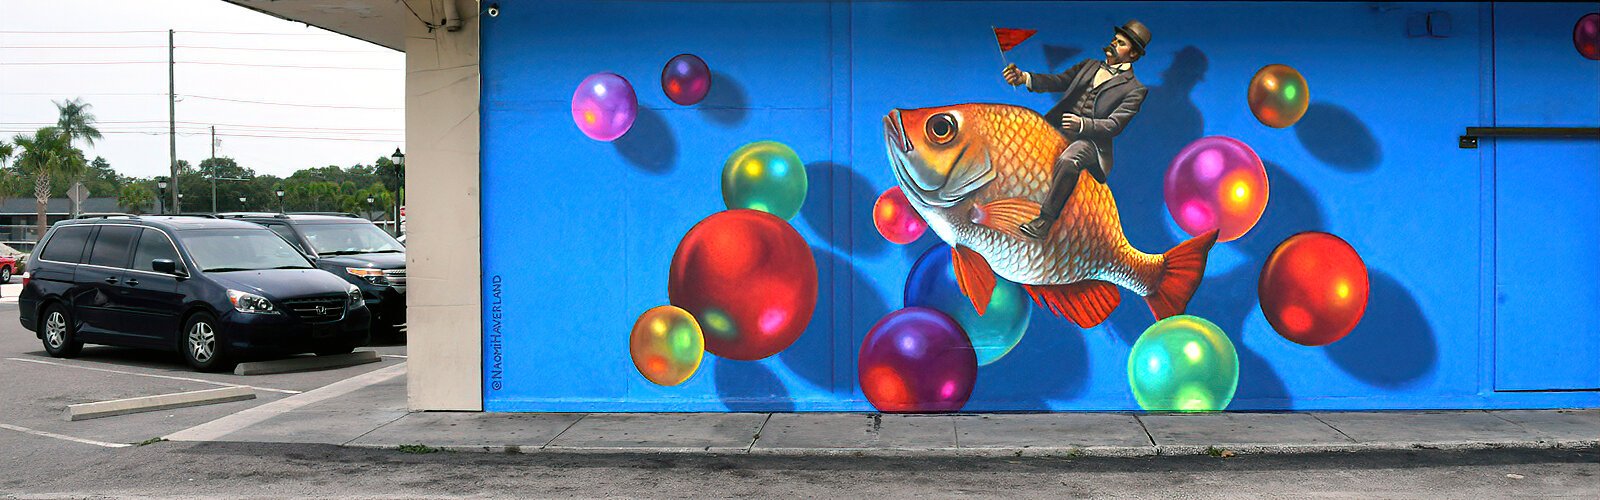 Whimsical and bright, “The Adventures of Señor Bubbles,” by artist Naomi Haverland, decorates the wall of laundromat Señor Bubbles in Clearwater's Downtown Gateway area.